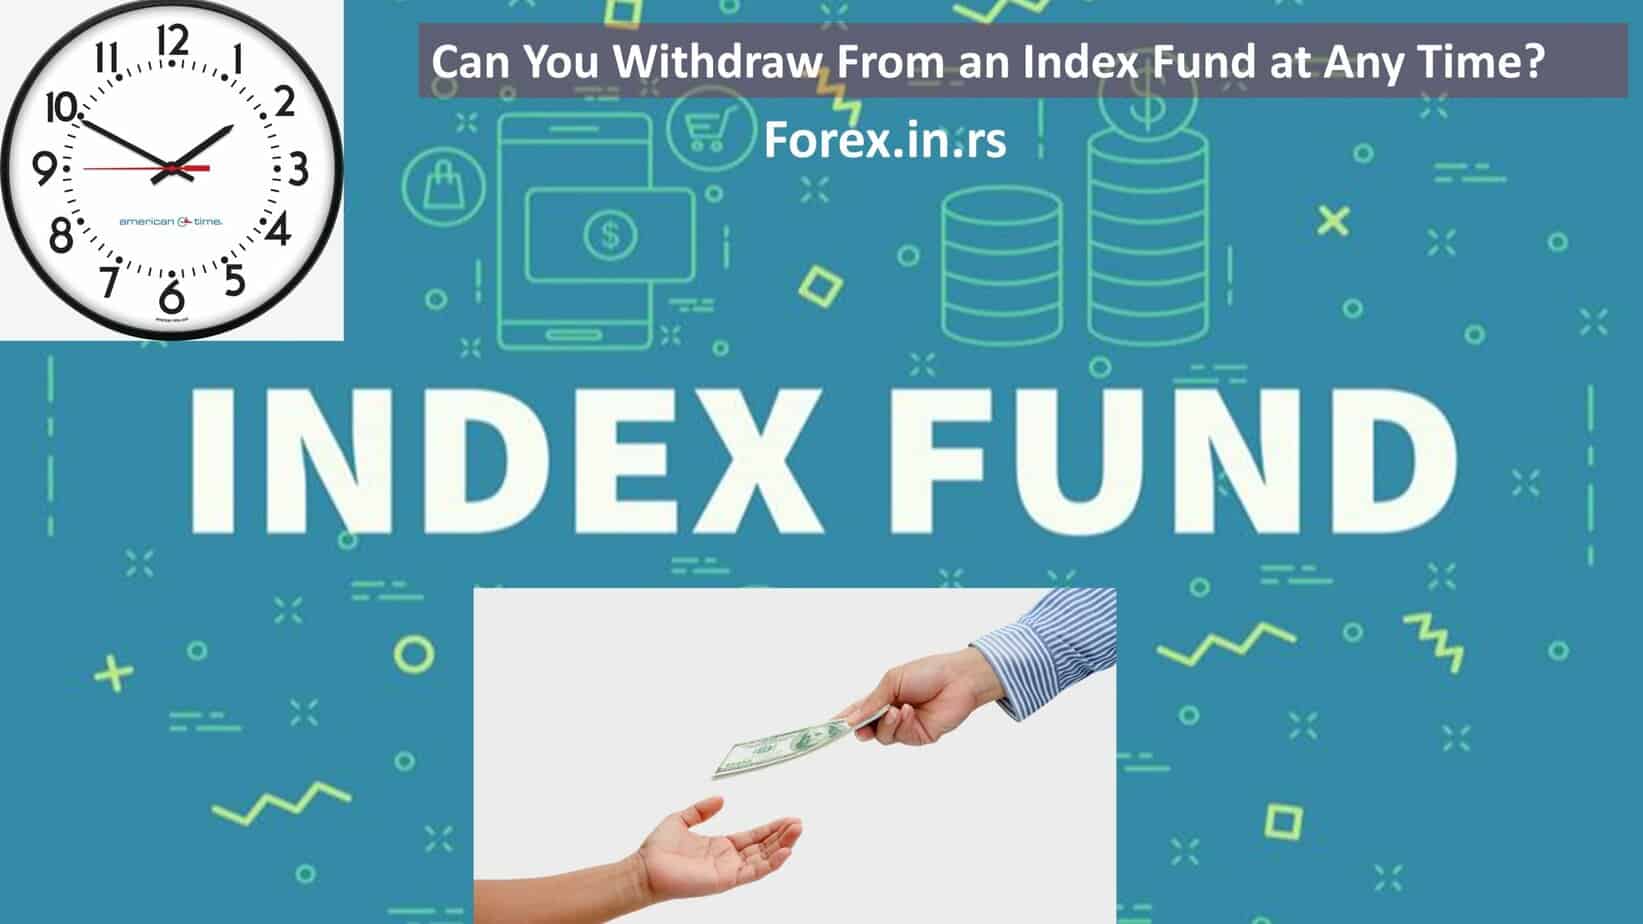 Can You Withdraw From an Index Fund at Any Time